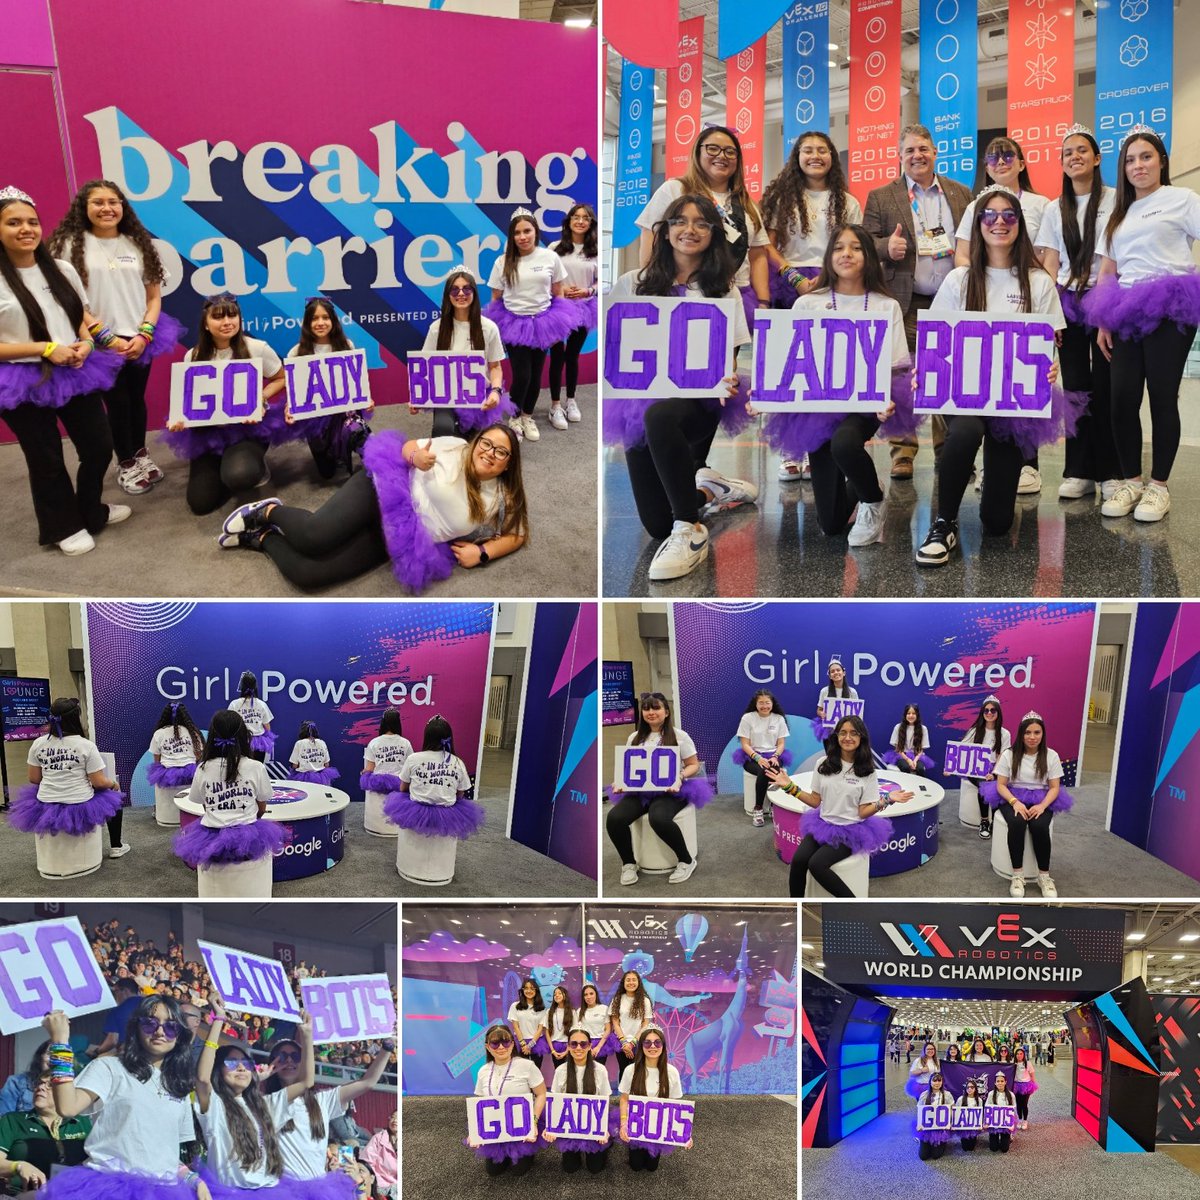 In our #VEXWorlds era! Check out our @taylorswift13 inspired outfit! Day 1 was a blast! We had a great time dancing at opening ceremony, hanging out at the #GirlPowered lounge, chatting with @REC_Foundation's, Dan Mantz, cheering our team on and I must say my girls drove their